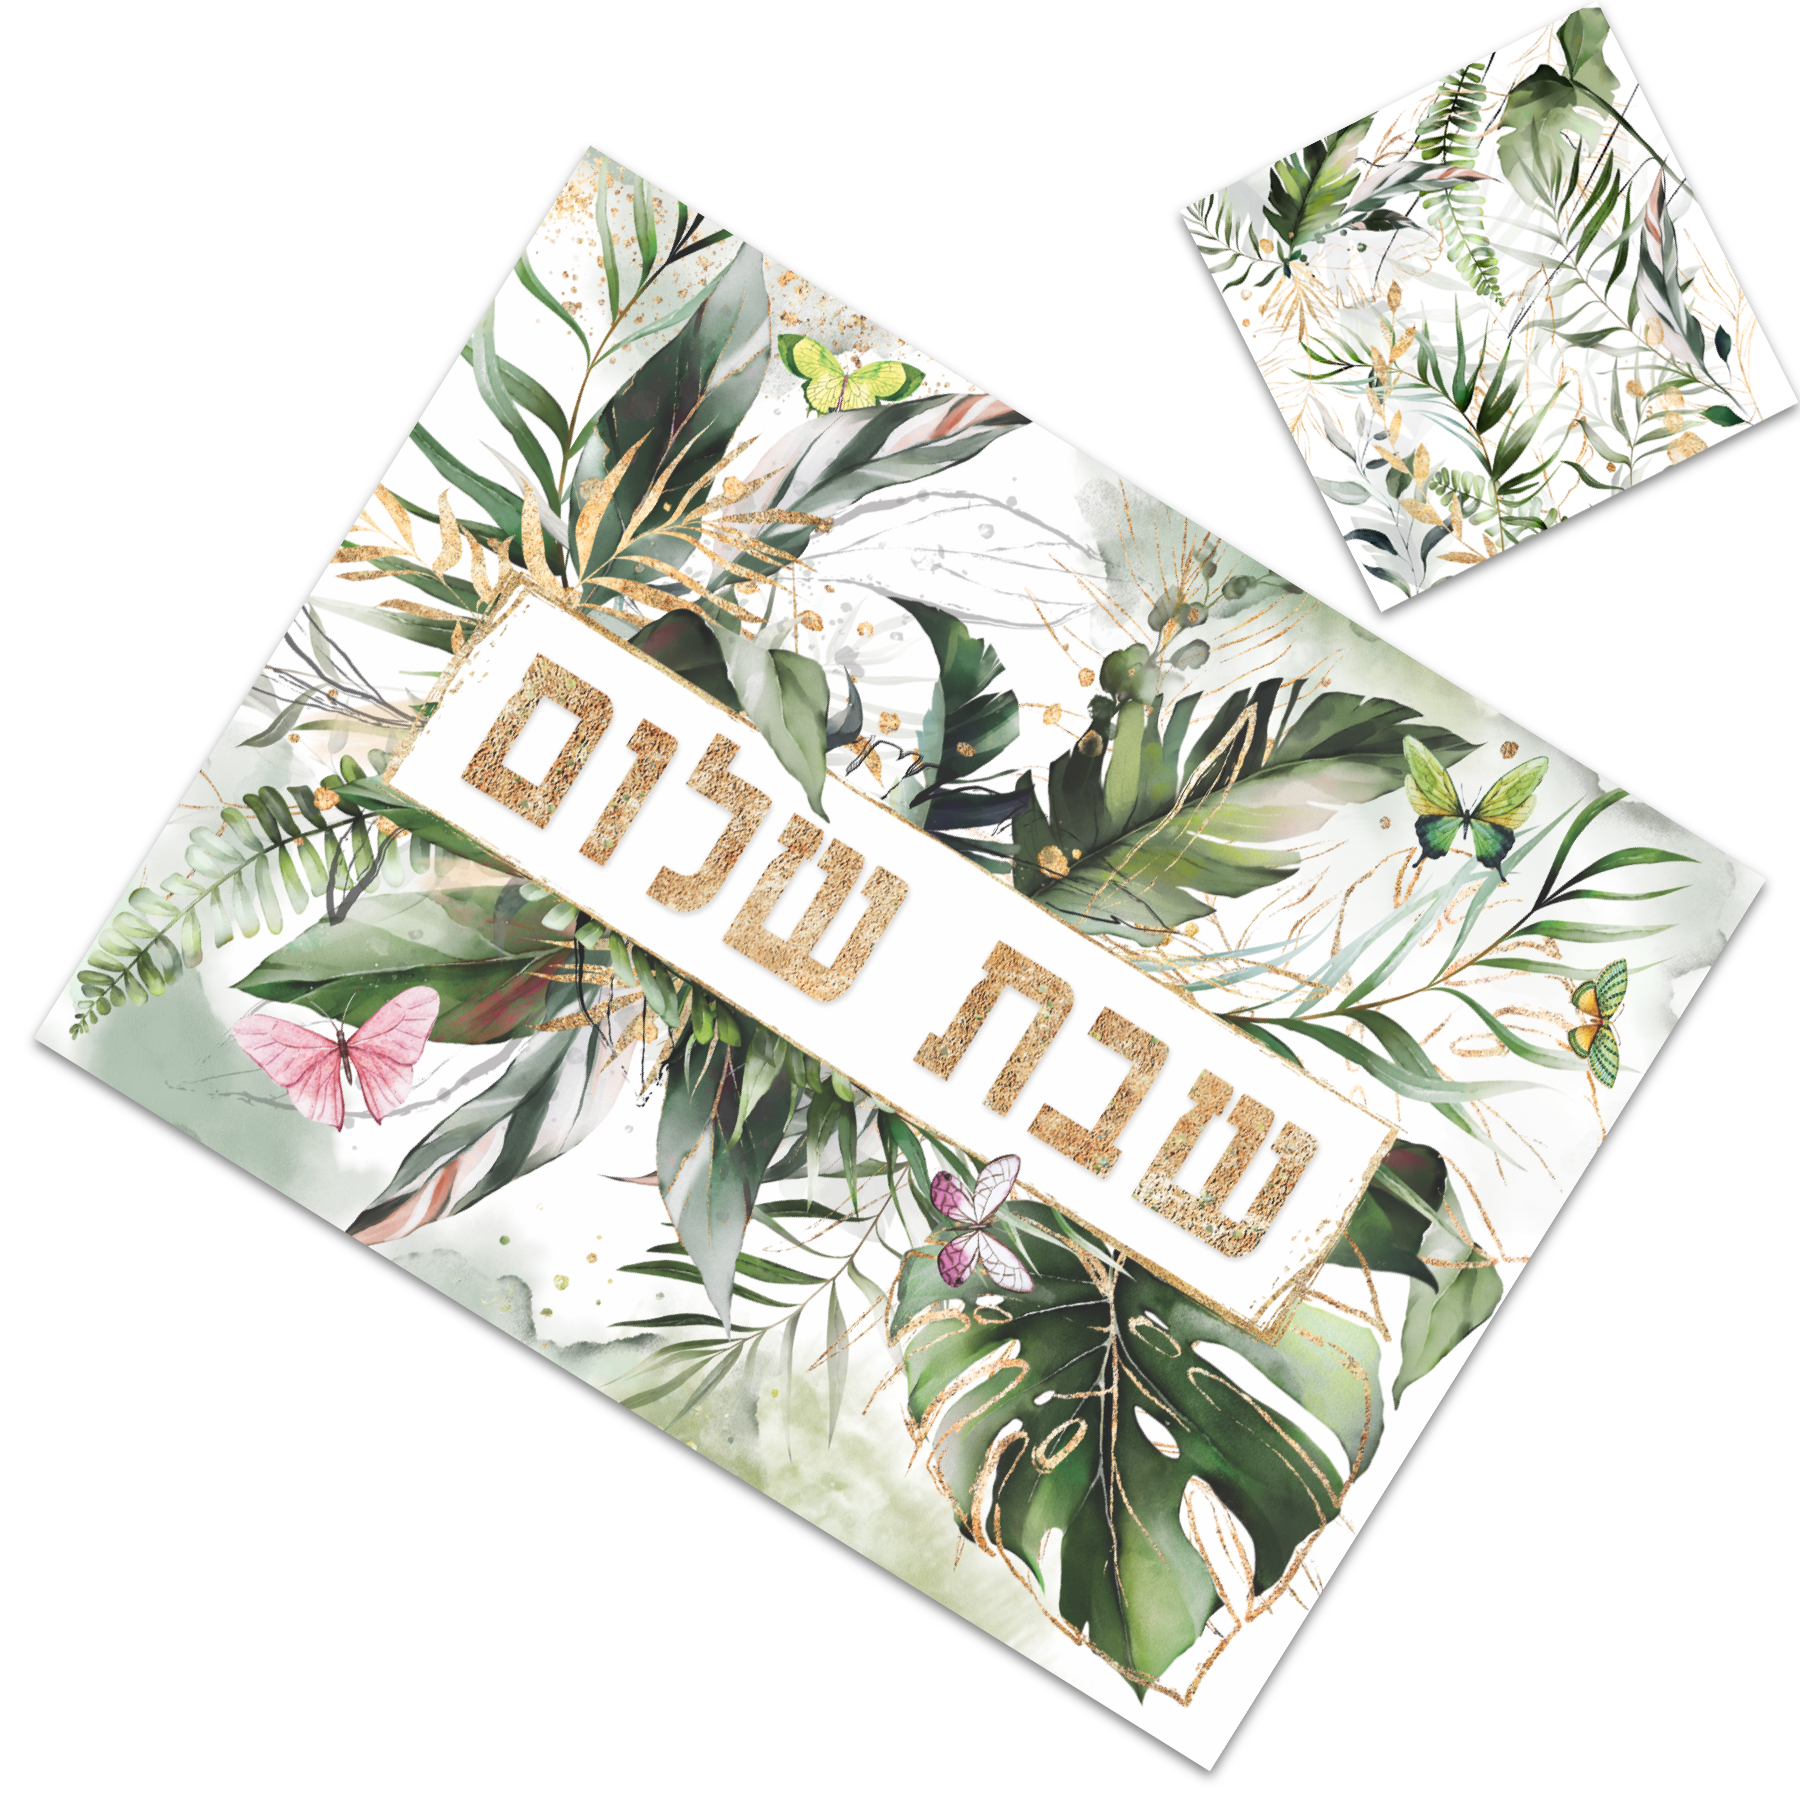 This tropical Shabbat placemat will give your table a modern, elegant and fresh look  Disposable rectangle paper place-mats with matching coasters.  Printed on heavy glossy card stock.  Set of 12  Size 16.5" x 12.25"